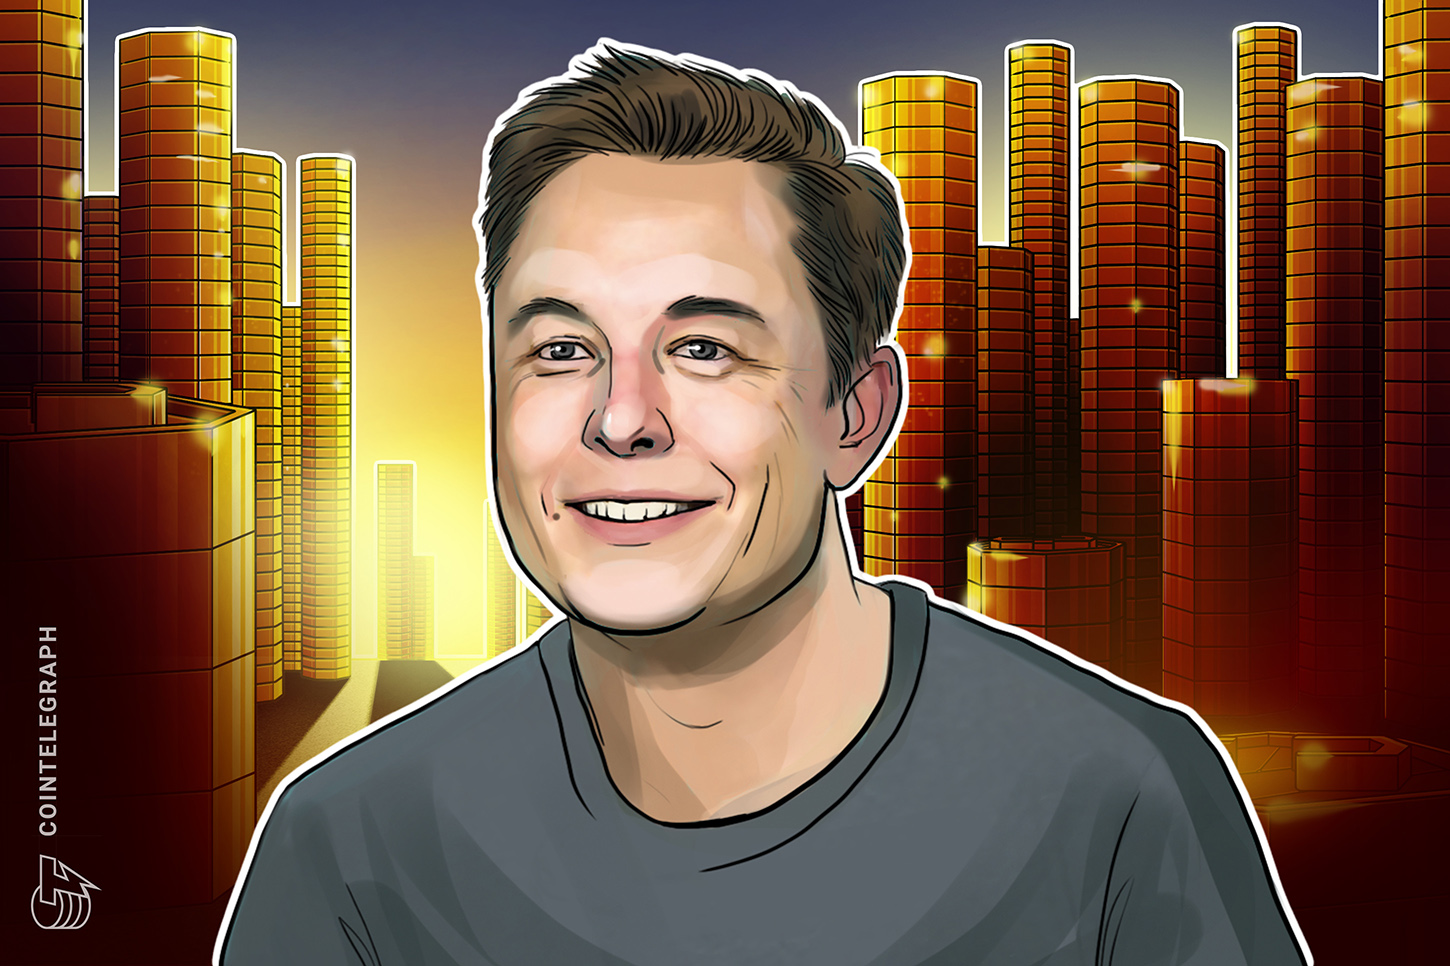 Tesla’s crypto-friendly CEO is now the richest man on the planet